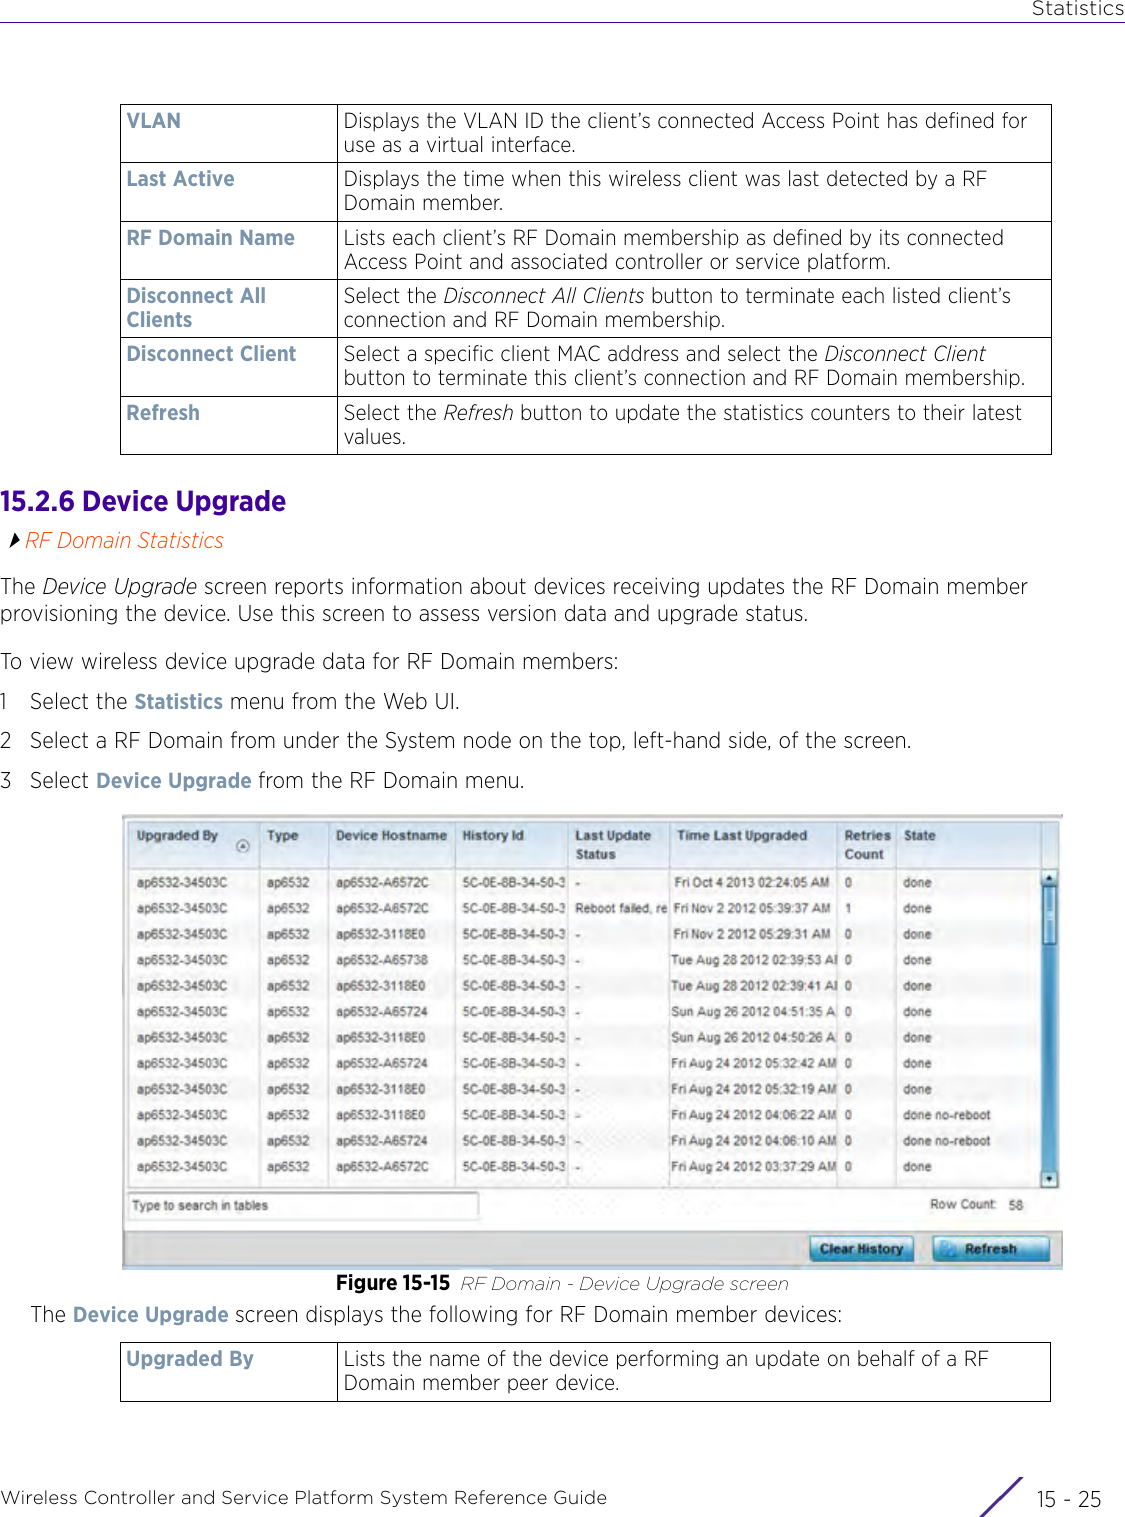 StatisticsWireless Controller and Service Platform System Reference Guide 15 - 2515.2.6 Device UpgradeRF Domain StatisticsThe Device Upgrade screen reports information about devices receiving updates the RF Domain member provisioning the device. Use this screen to assess version data and upgrade status.To view wireless device upgrade data for RF Domain members:1 Select the Statistics menu from the Web UI.2 Select a RF Domain from under the System node on the top, left-hand side, of the screen.3Select Device Upgrade from the RF Domain menu.Figure 15-15 RF Domain - Device Upgrade screenThe Device Upgrade screen displays the following for RF Domain member devices:VLAN Displays the VLAN ID the client’s connected Access Point has defined for use as a virtual interface.Last Active Displays the time when this wireless client was last detected by a RF Domain member.RF Domain Name Lists each client’s RF Domain membership as defined by its connected Access Point and associated controller or service platform.Disconnect All ClientsSelect the Disconnect All Clients button to terminate each listed client’s connection and RF Domain membership.Disconnect Client Select a specific client MAC address and select the Disconnect Client button to terminate this client’s connection and RF Domain membership.Refresh Select the Refresh button to update the statistics counters to their latest values.Upgraded By Lists the name of the device performing an update on behalf of a RF Domain member peer device.